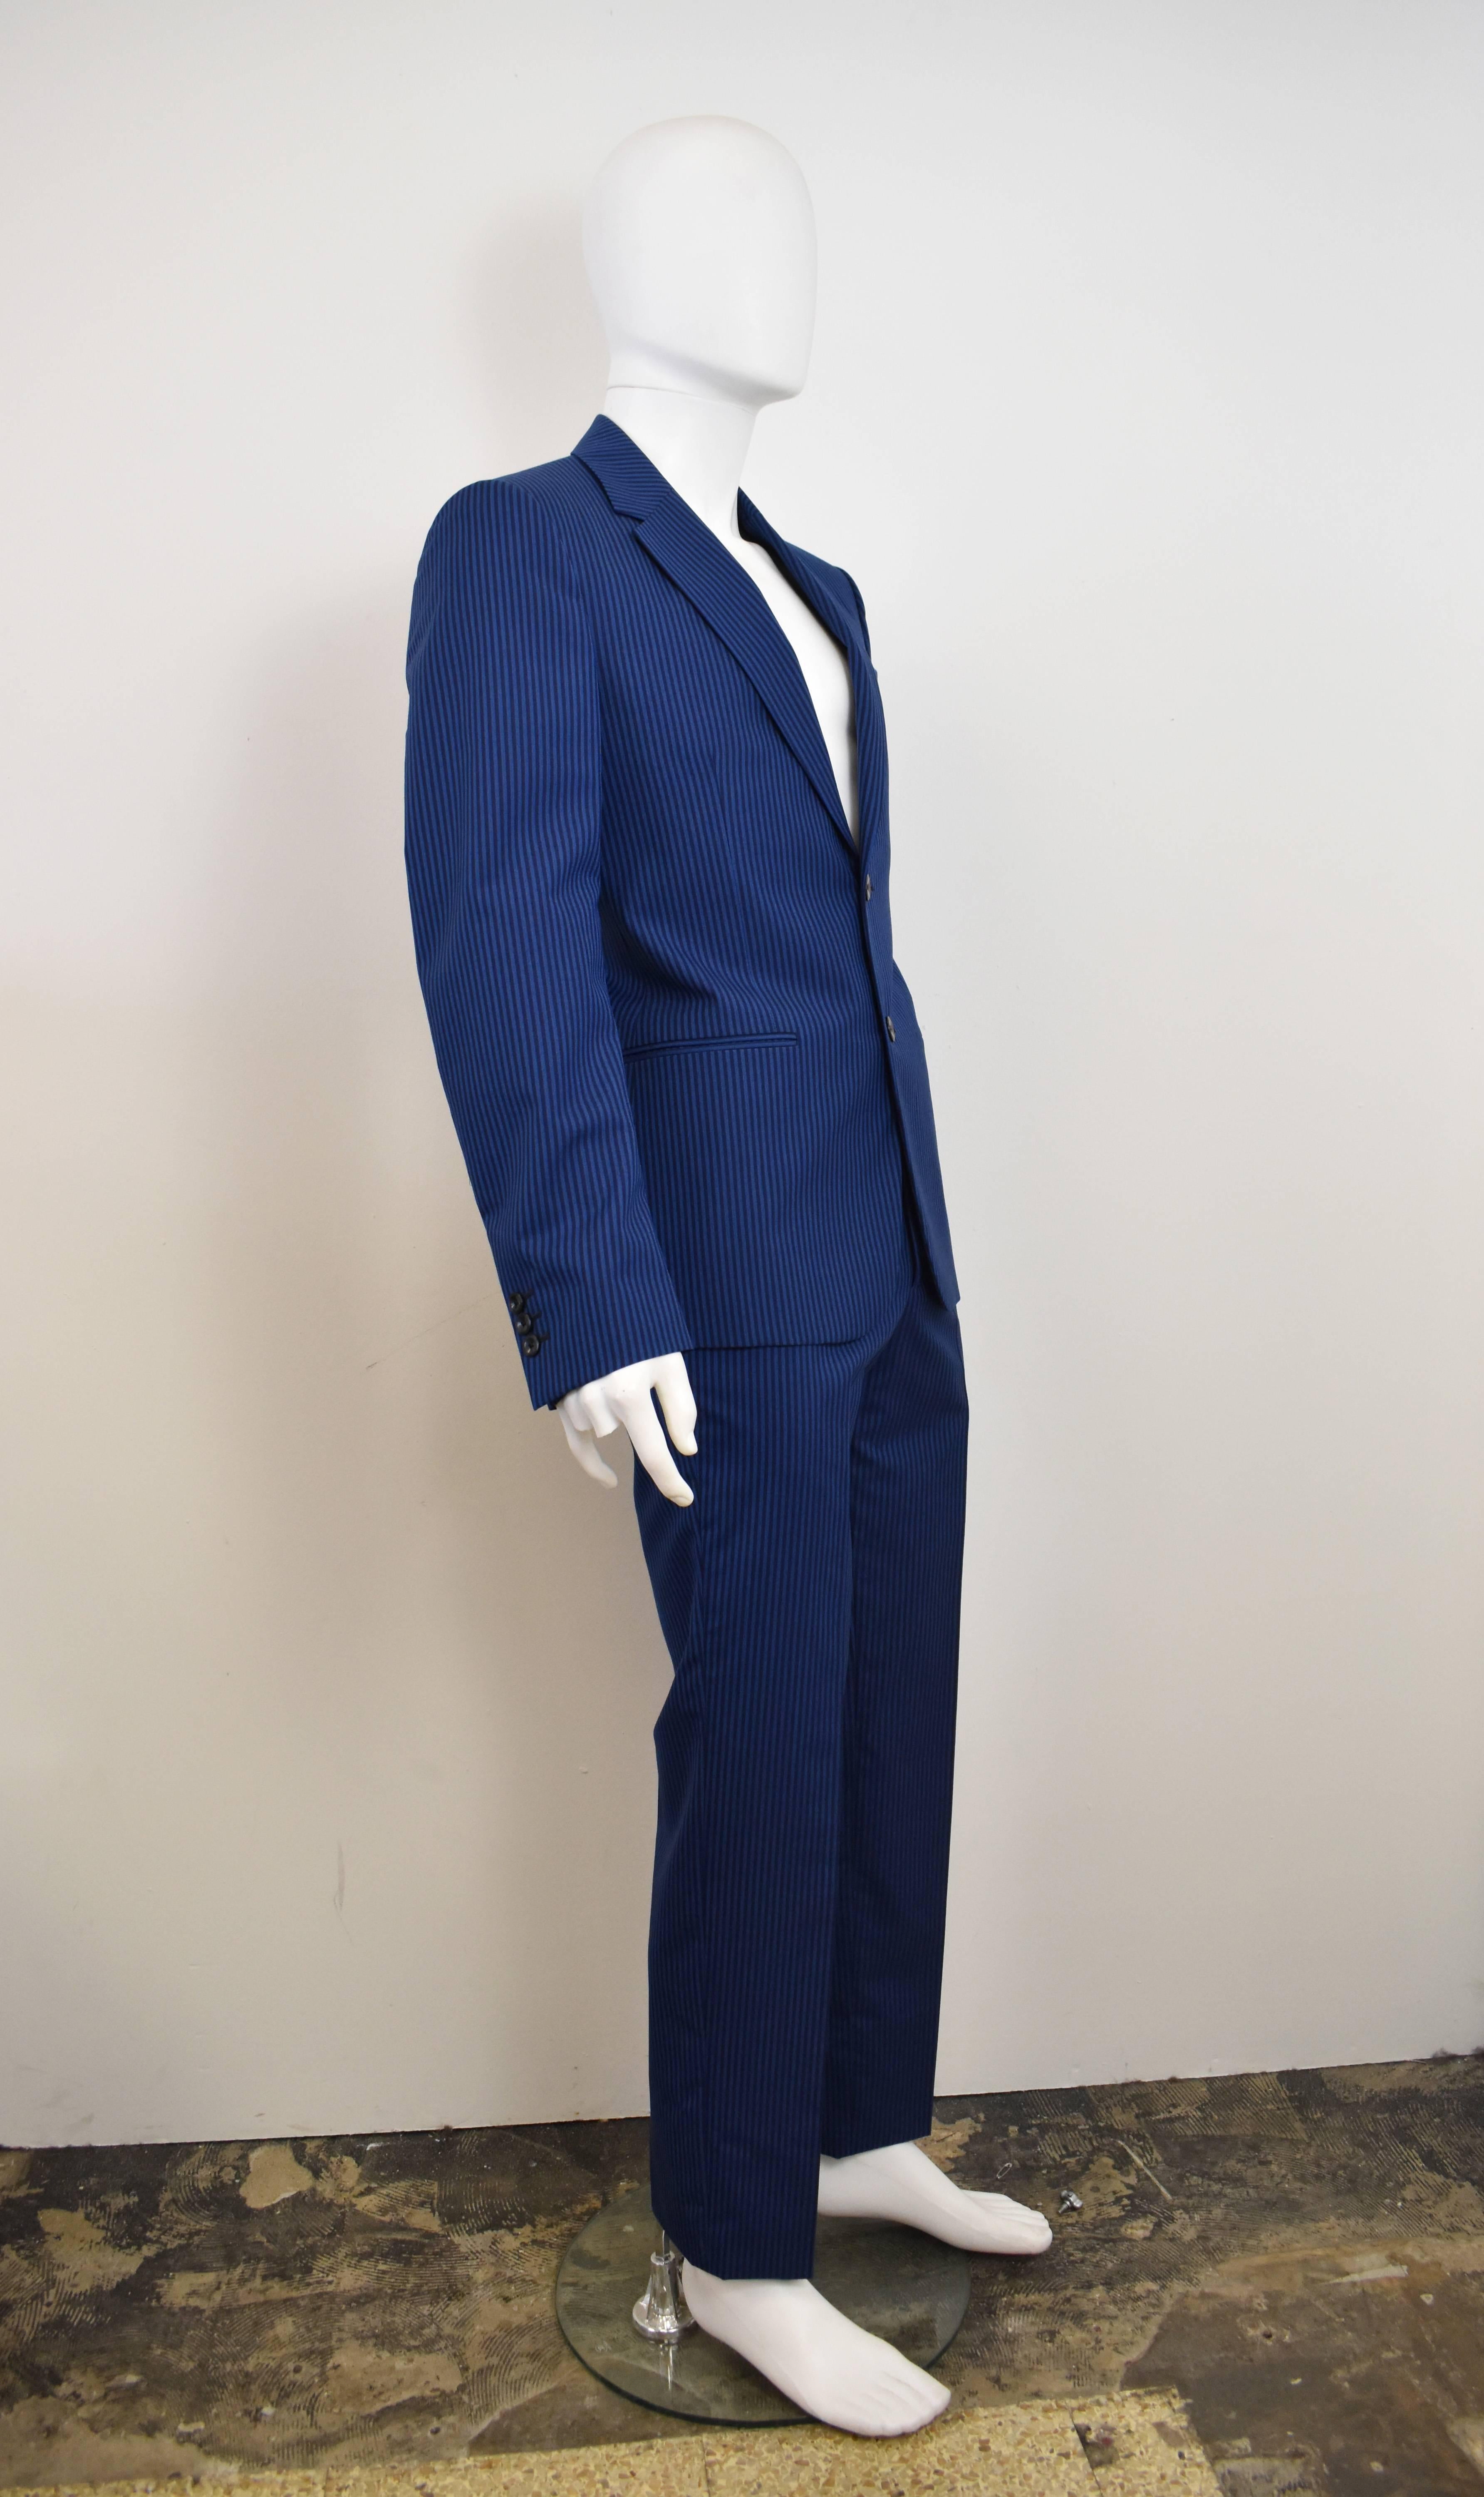 Alexander McQueen Peacock Blue and Navy Stripe Suit from S/S15 collection. 
In excellent condition, 100% wool. A striking blue – great alternative to the classic navy suit. Slim-fit. 


JACKET
Length - 29.5
Bust - 40
Waist - 36
Hips - 39
Sleeve